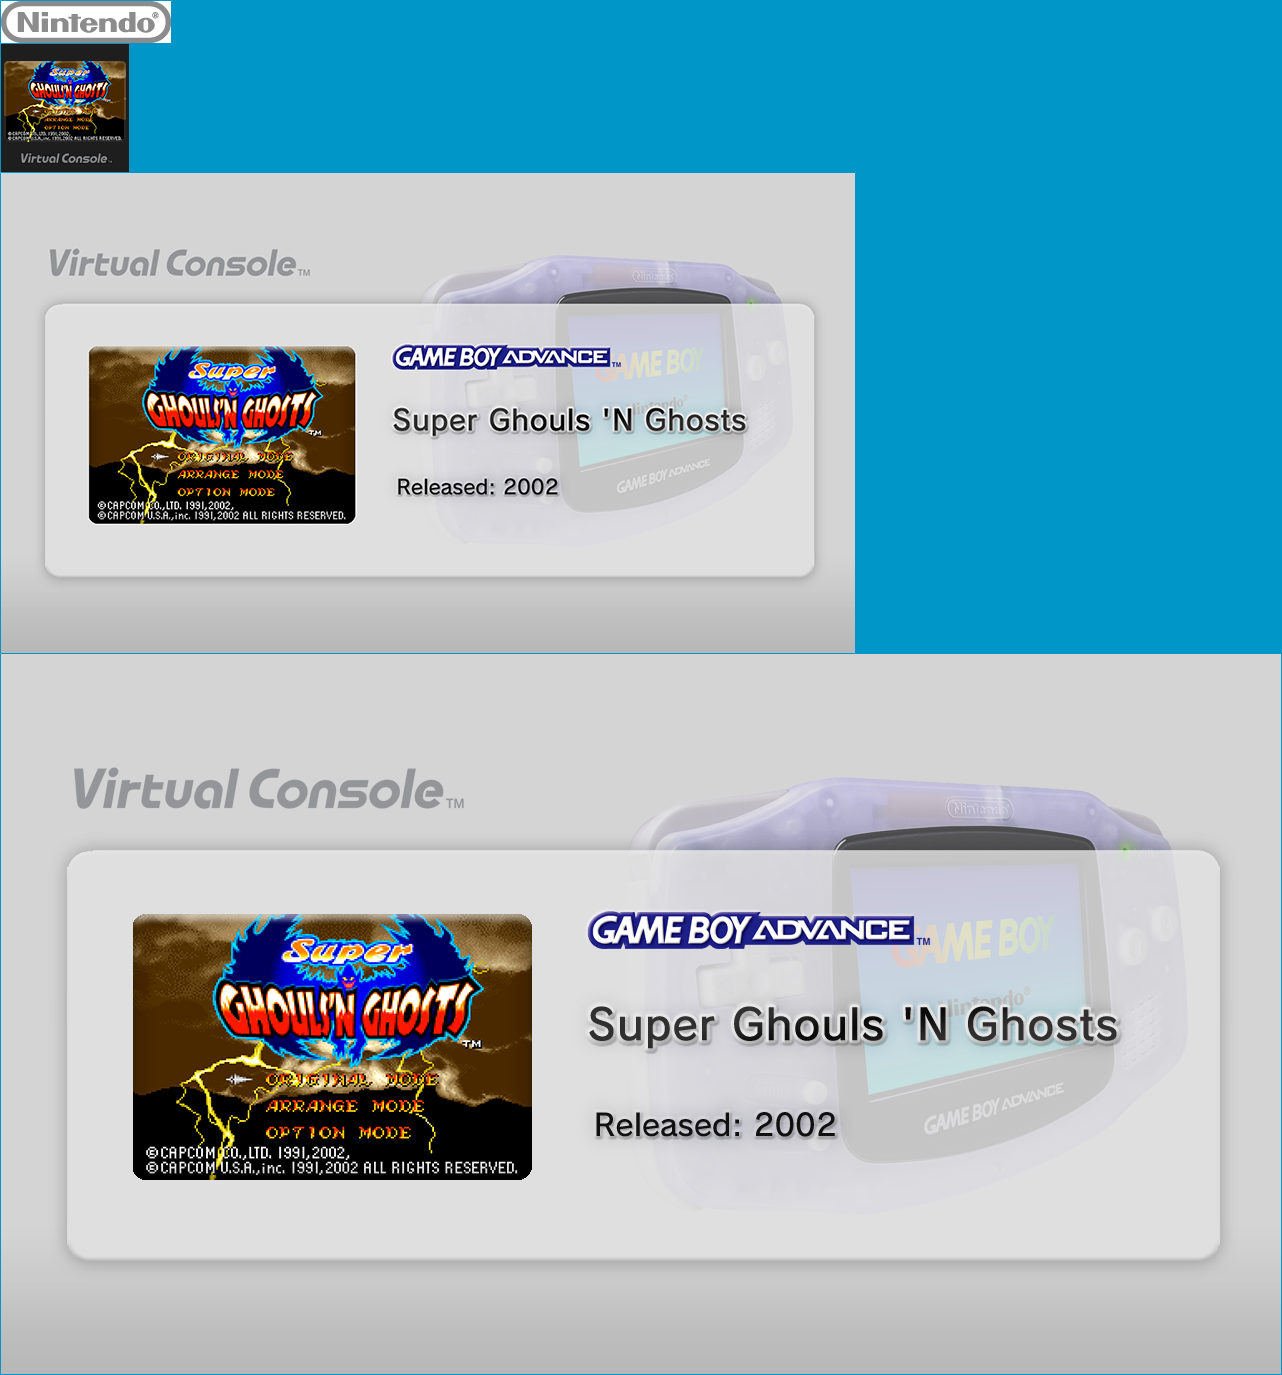 Virtual Console - Super Ghouls 'N Ghosts